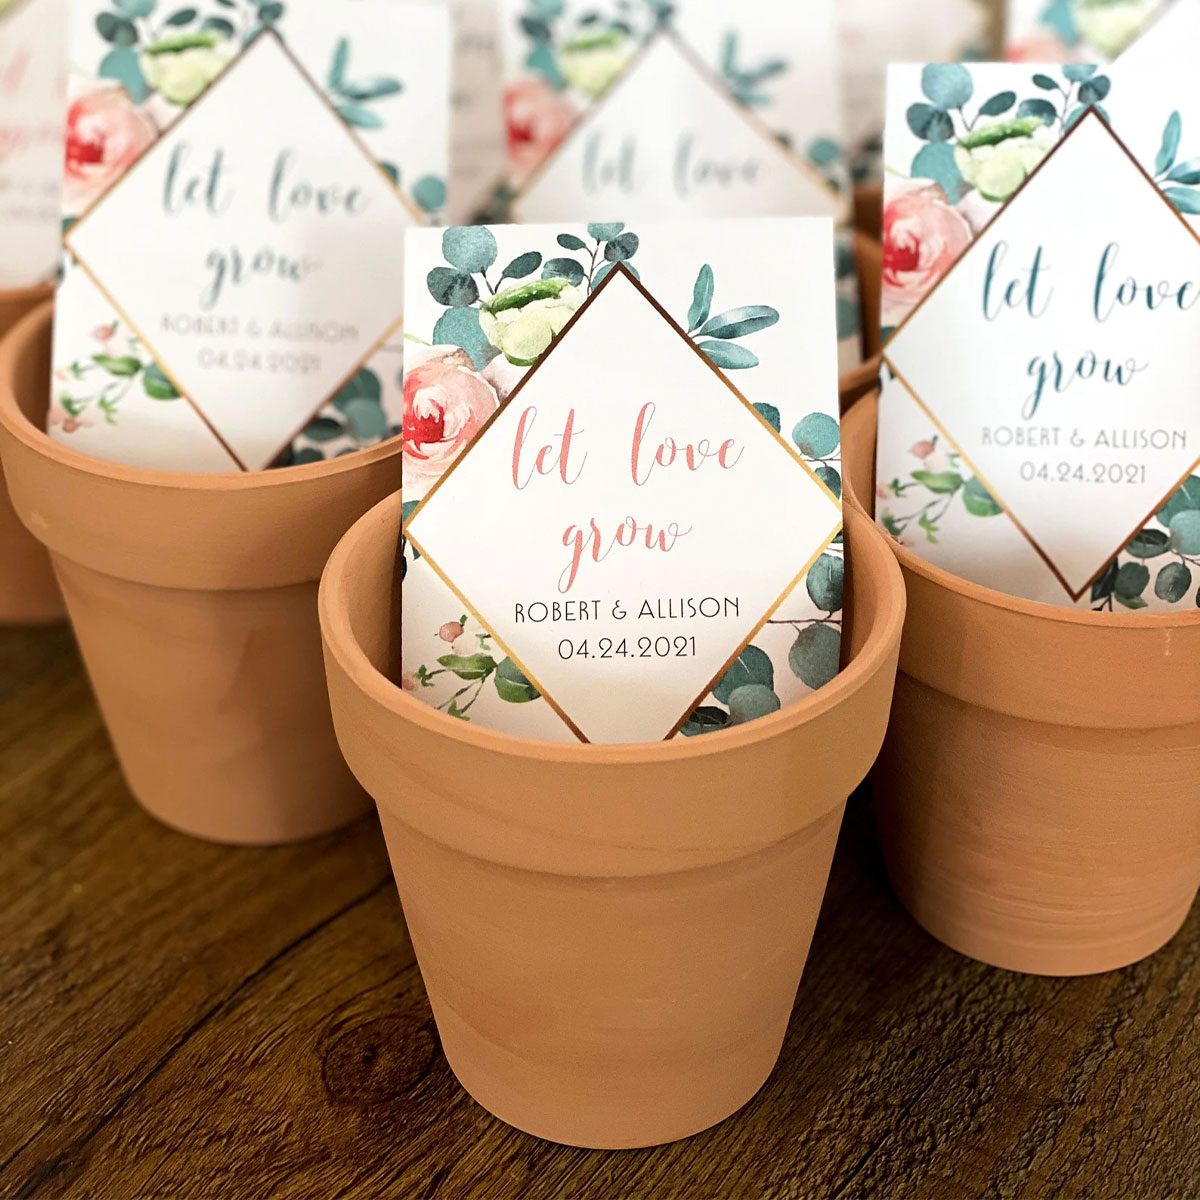 20 Personalized Wedding Gift Ideas For the Bride and Groom